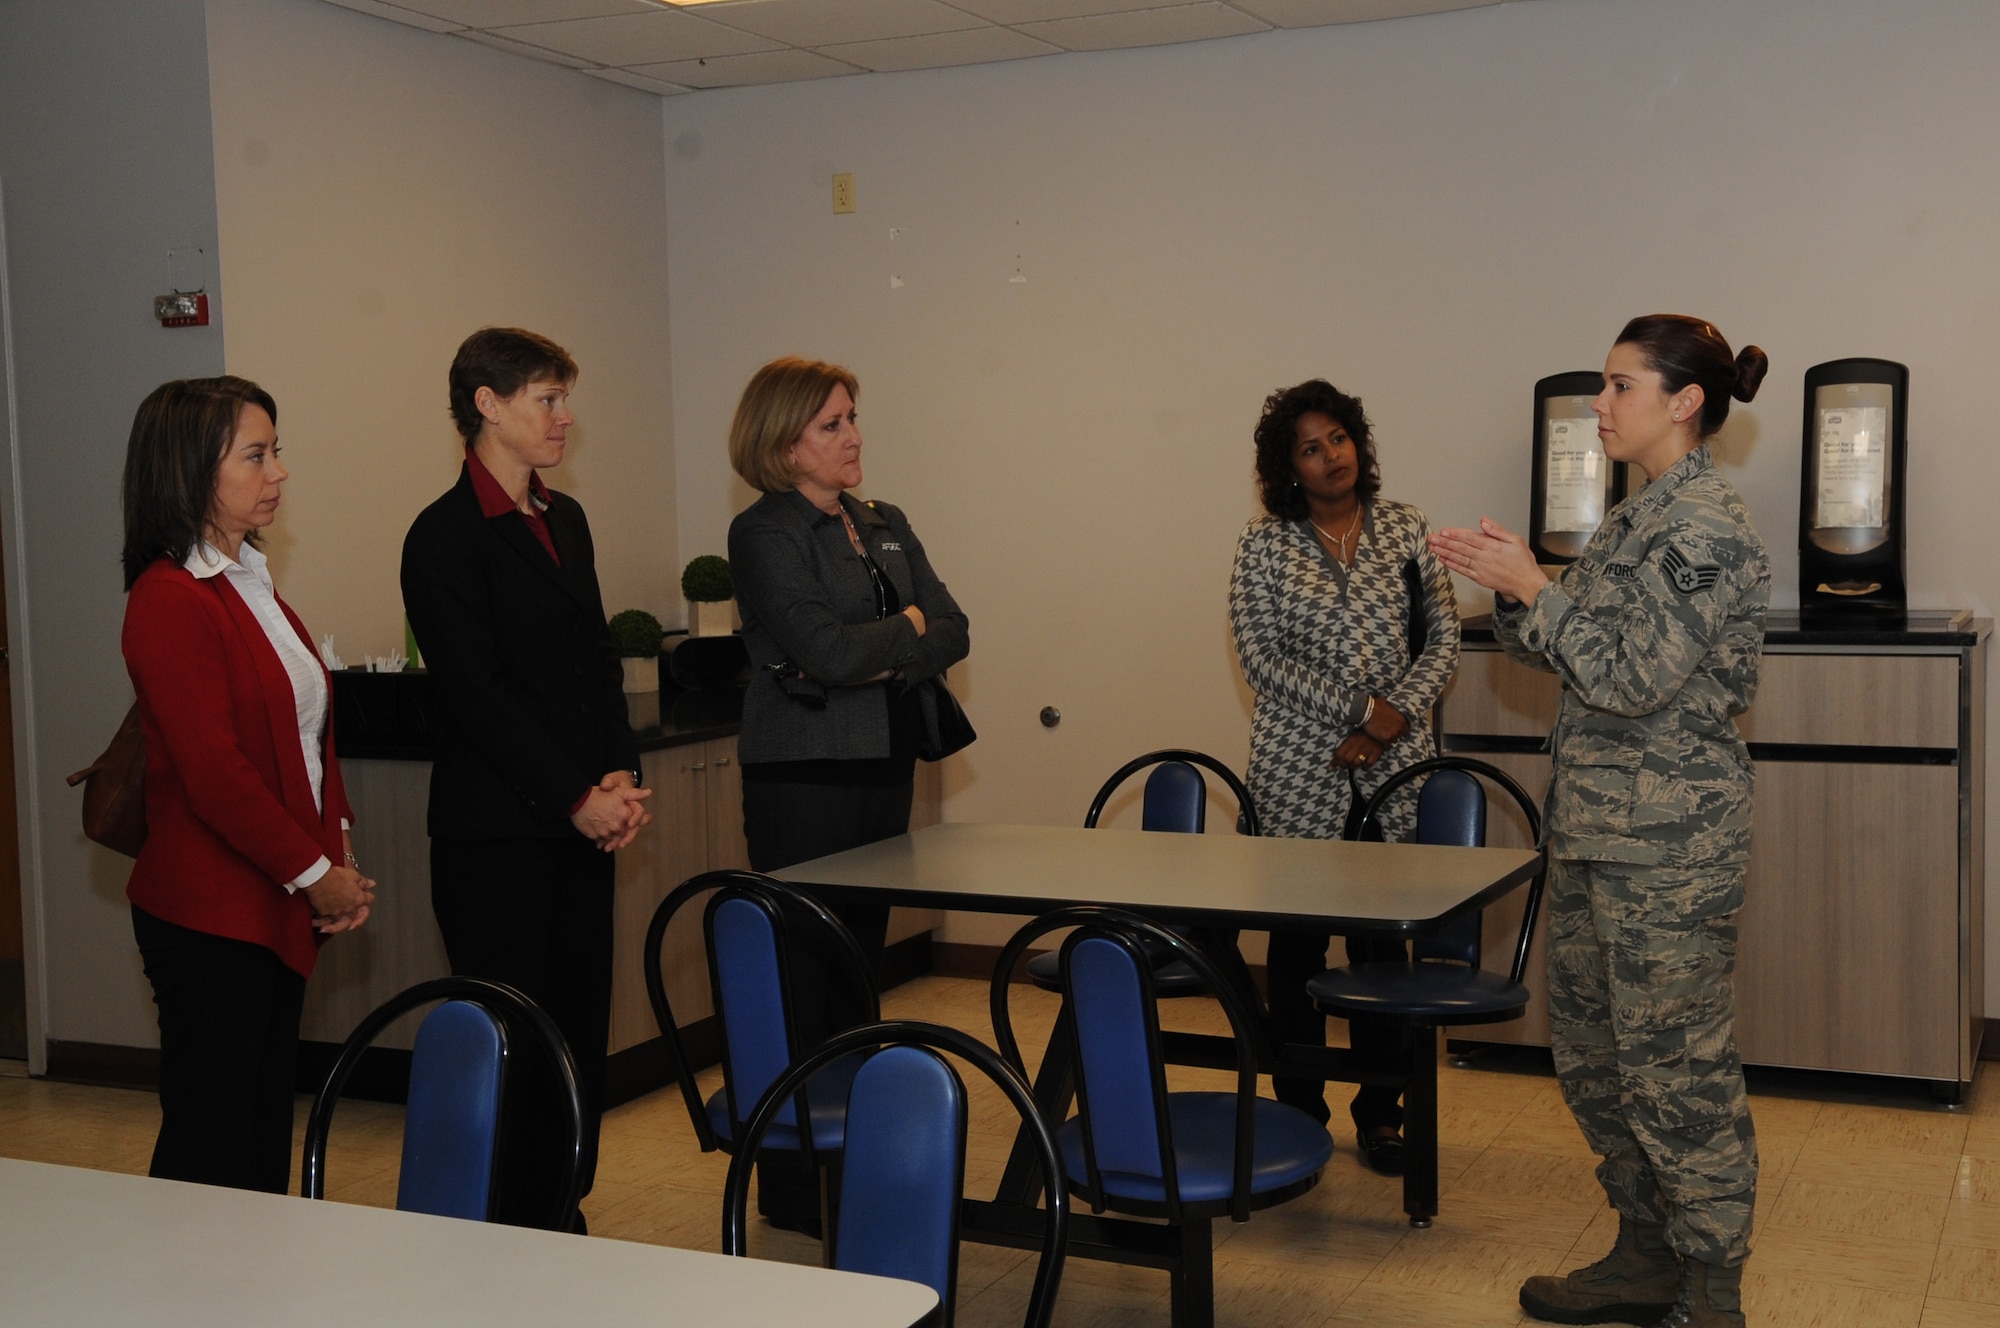 Staff Sgt. Kelsi Ferinella, NCO in-charge of The Lift kiosk operation, briefs Air Force Global Strike Command spouses on The Lift and The Source, flightline operational kitchen and touch-and-go dining on Barksdale Air Force Base, La. Dec. 16, 2014. Ferinella briefed on the types of food served along with the quality of food, upgrades and changes and customer service hours for flightline workers. (U.S. Air Force photo/Senior Airman Kristin High)